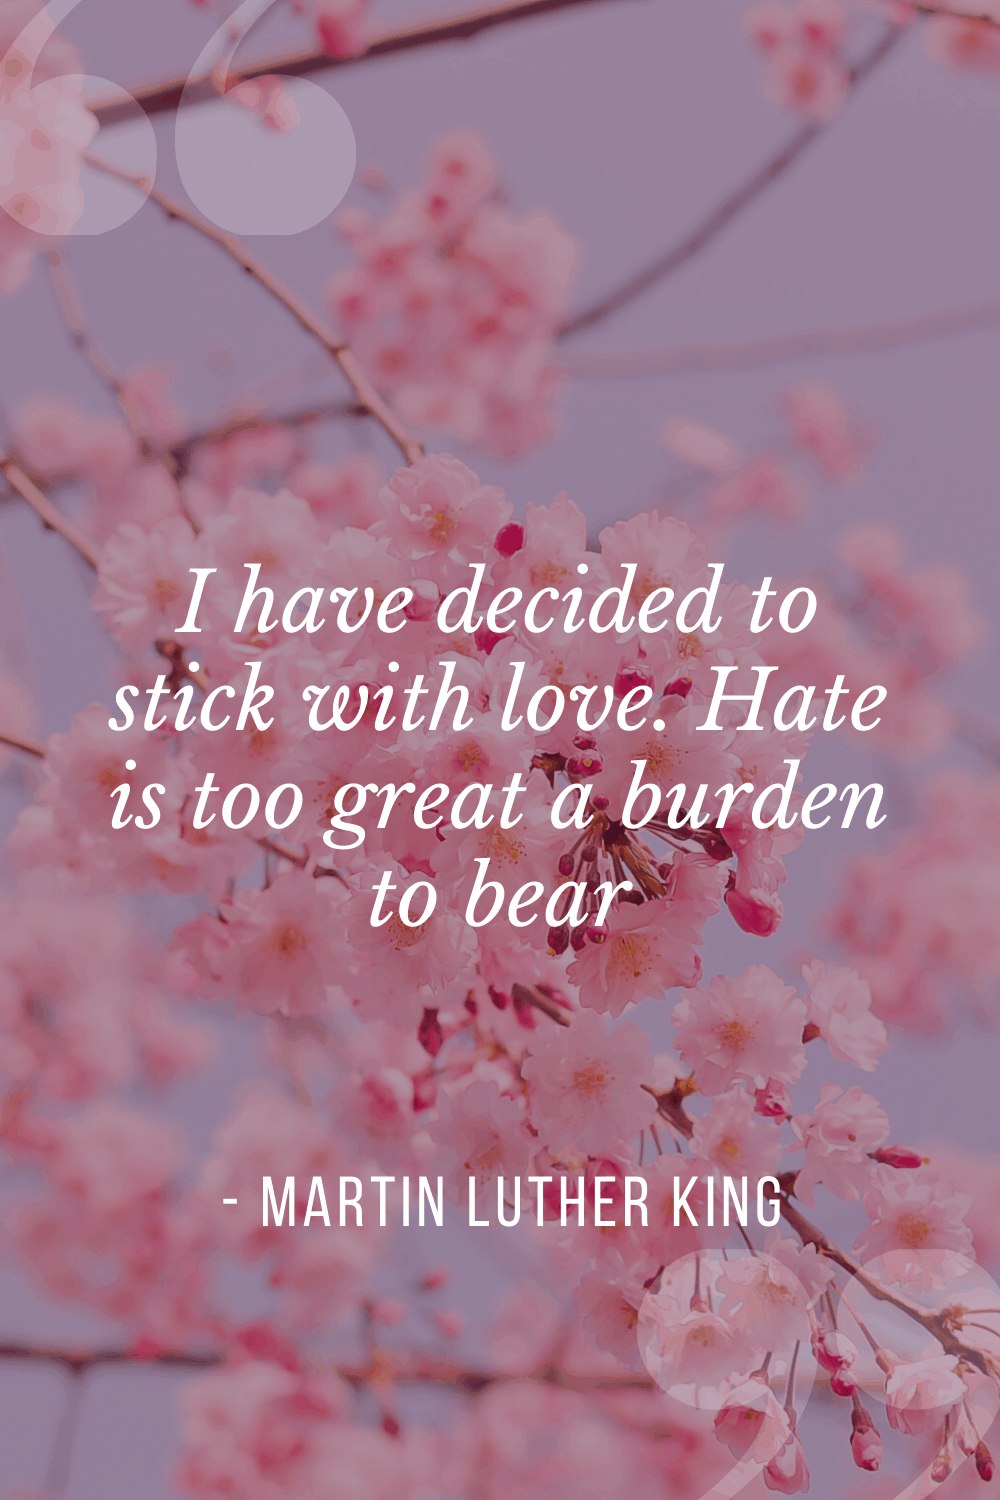 “I have decided to stick with love. Hate is too great a burden to bear”, Martin Luther King Jr.